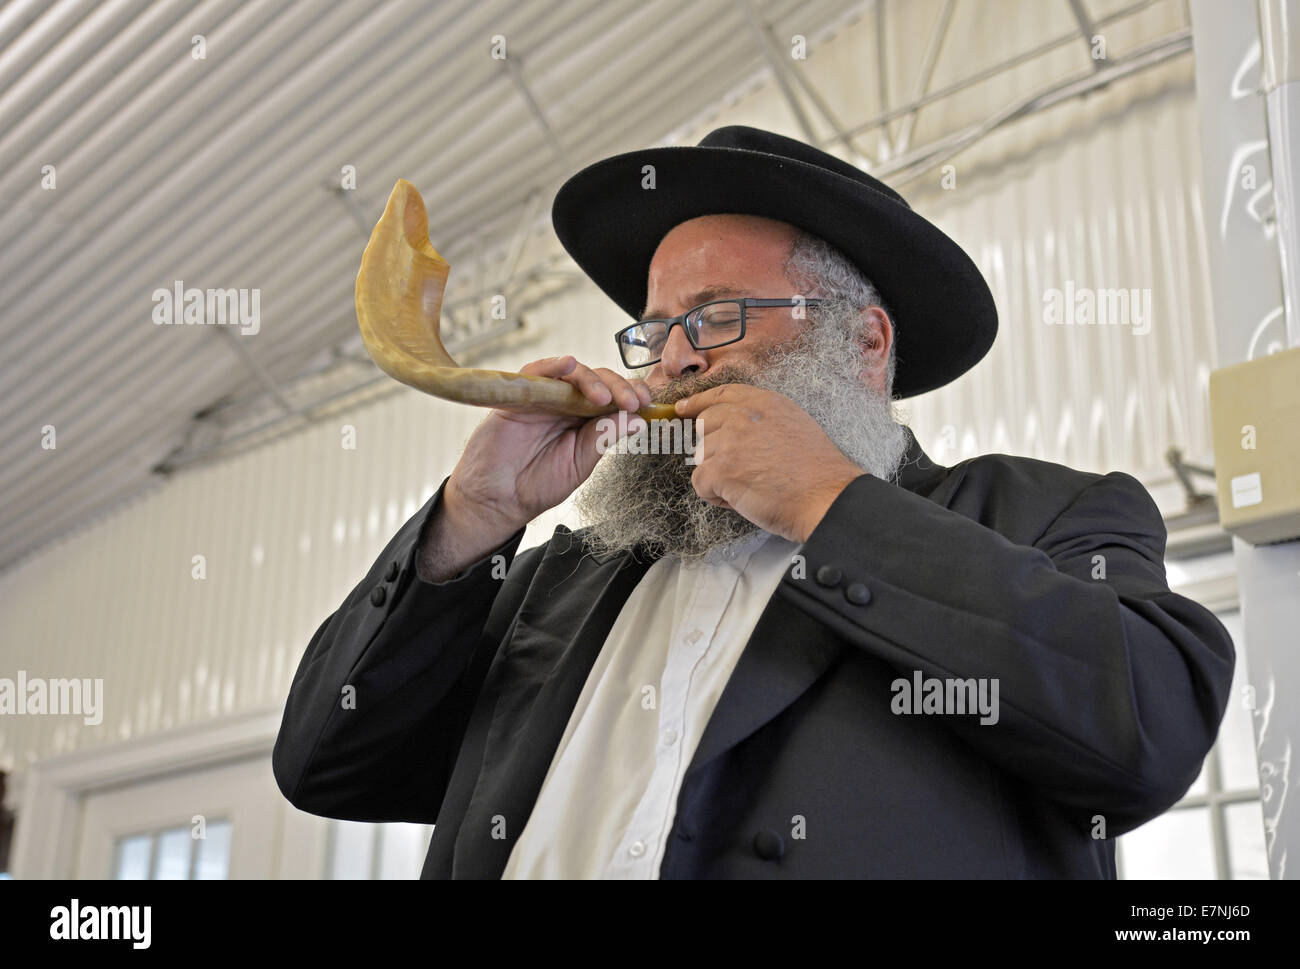 Religious Jewish man blows a shofar during services prior to New Year in a synagogue in Cambria Heights, Queens New York Stock Photo